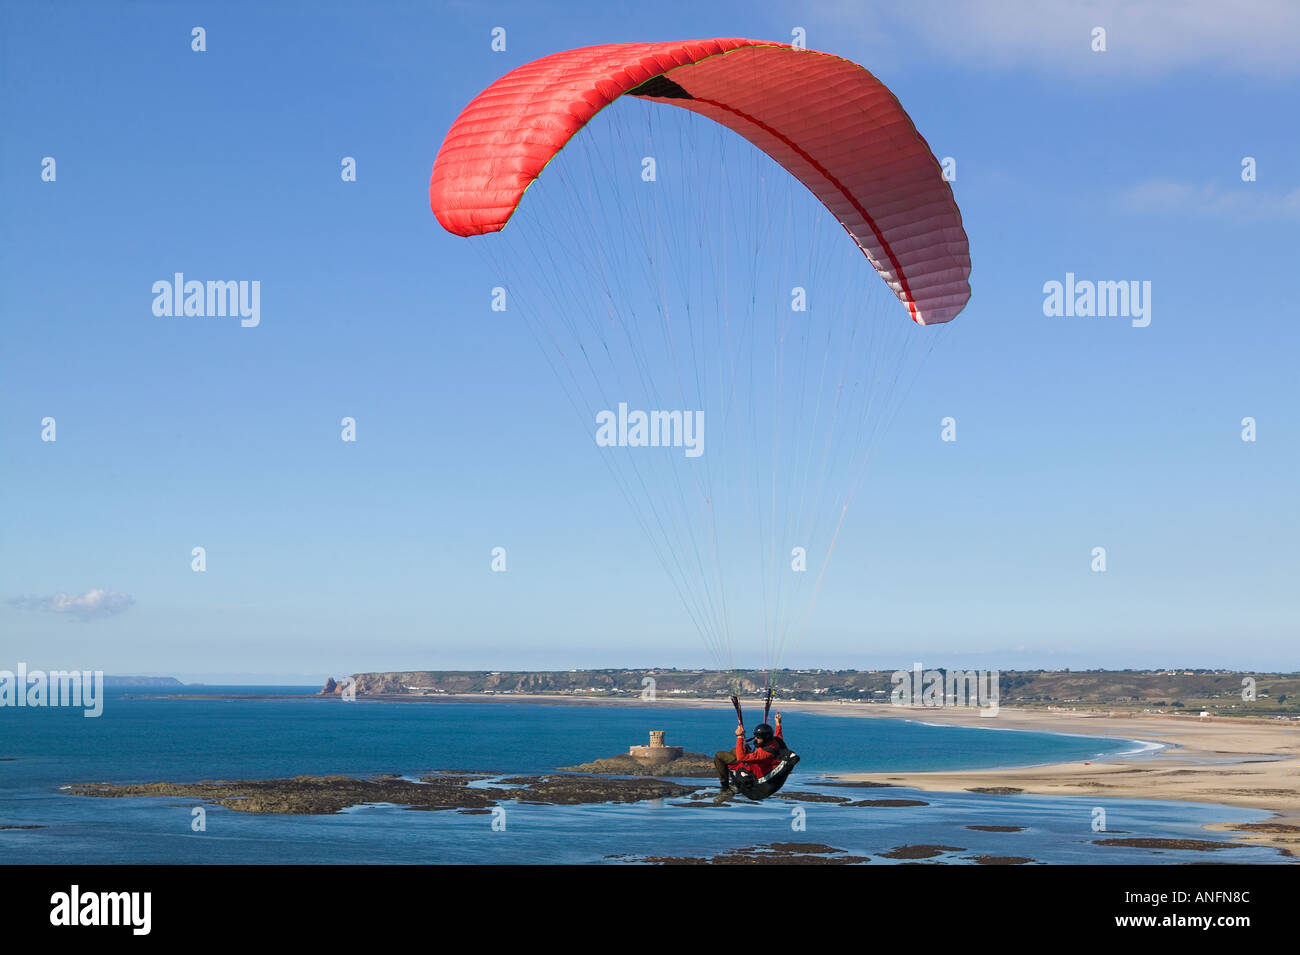 Paragliding over St Ouens beach, Jersey, Channel Islands Stock Photo - Alamy